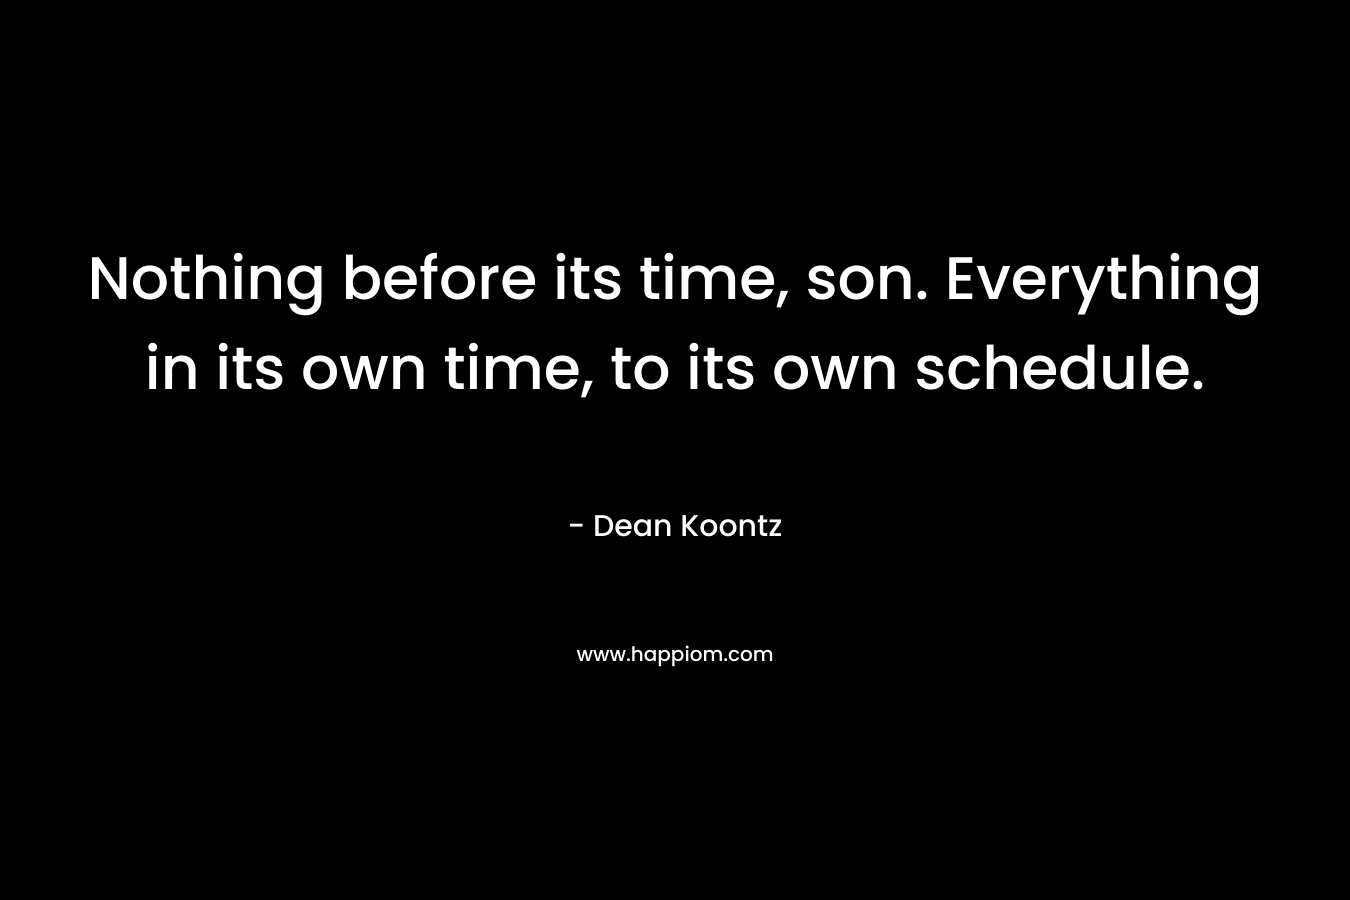 Nothing before its time, son. Everything in its own time, to its own schedule. – Dean Koontz